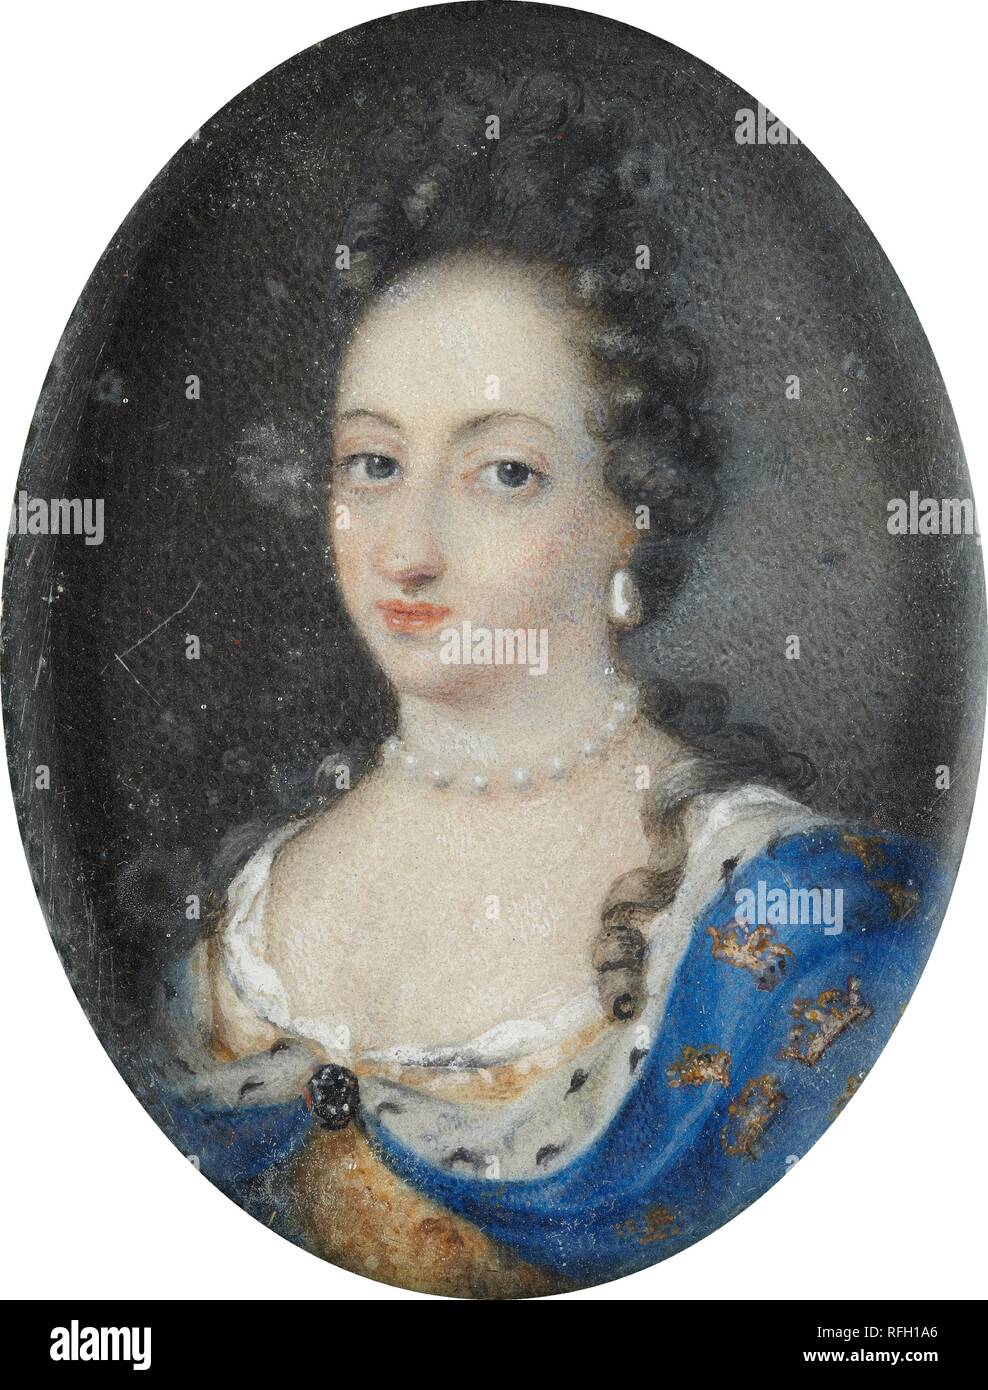 Miniature portrait of Queen Ulrika Eleonora the Elder, Queen of Sweden 1680-1693. Date/Period: Ca. 1680. Painting. Gouache on parchment. Height: 62 mm (2.44 in); Width: 48 mm (1.88 in). Author: UNKNOWN ARTIST. Stock Photo